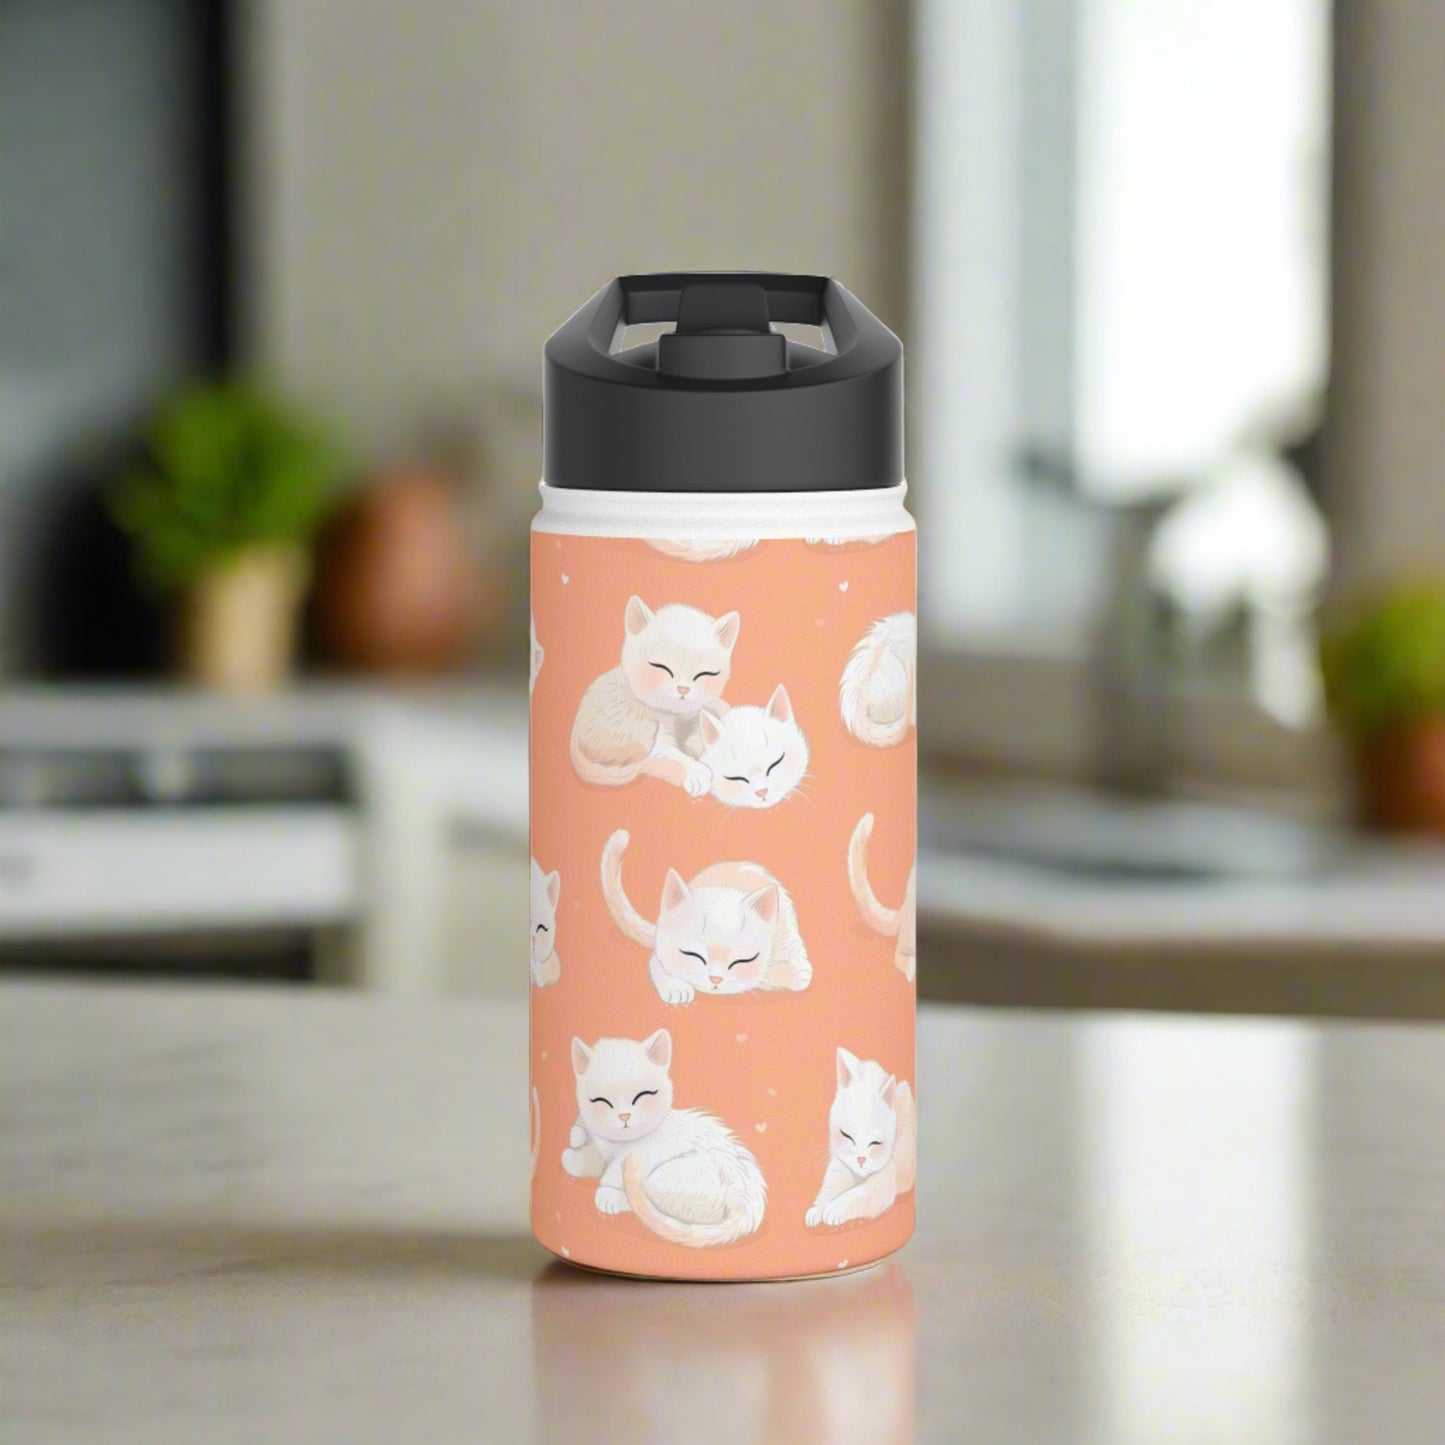 Insulated Water Bottle, 12oz, Cute Kittens - Double Walled Stainless Steel Thermos, Keeps Drinks Hot or Cold